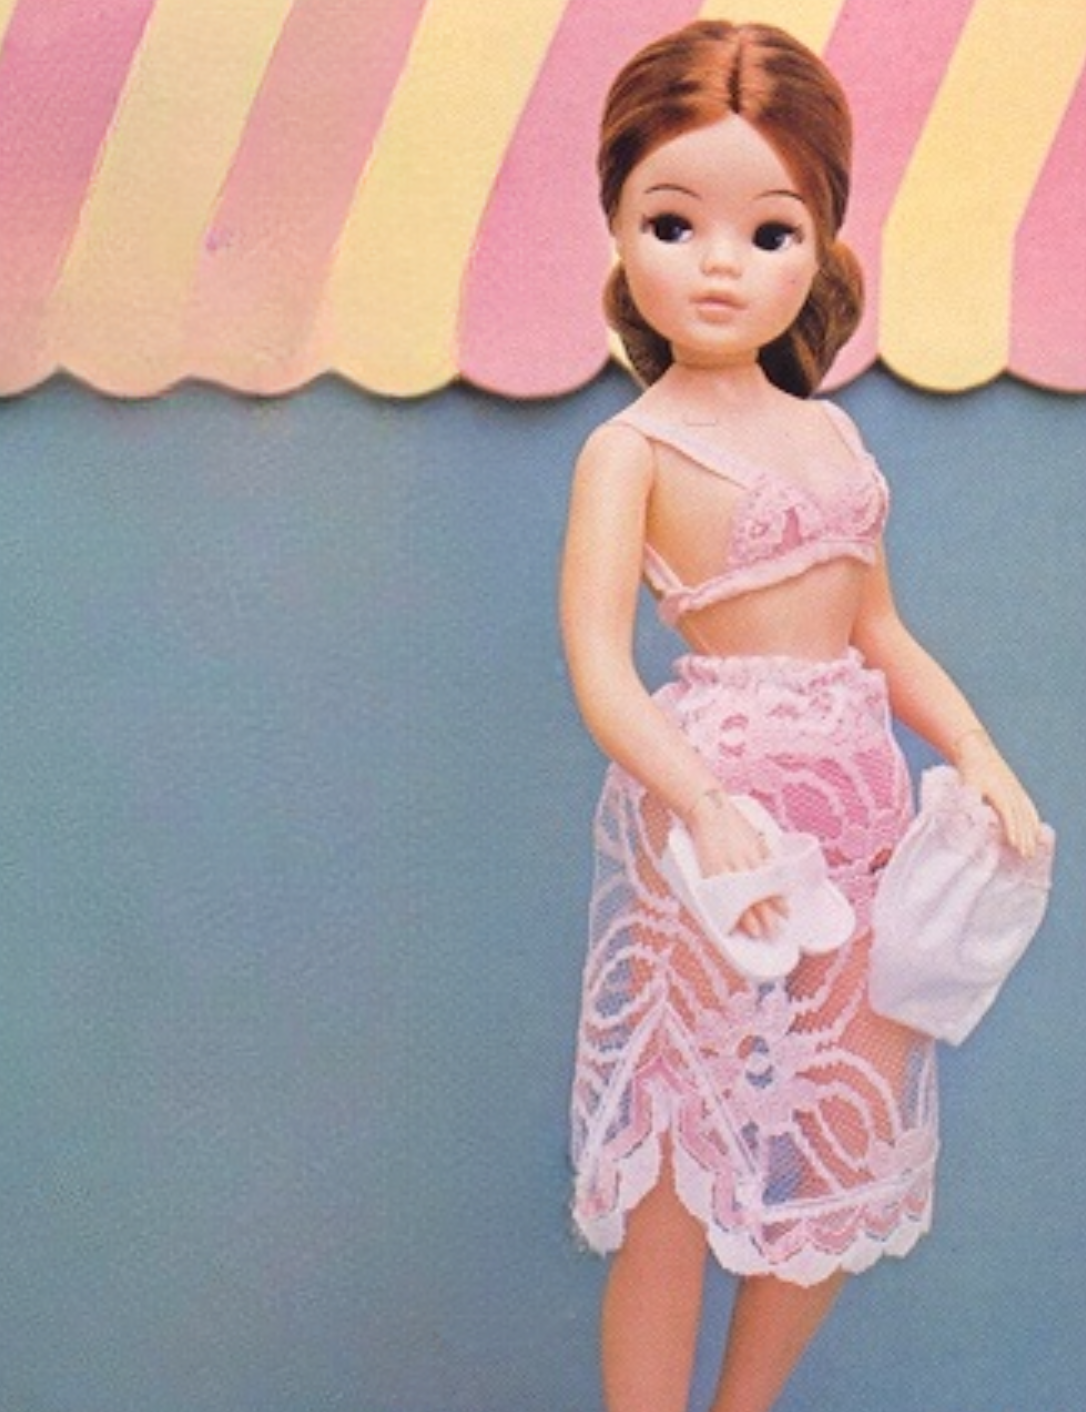 1982 Pedigree Sindy Fashion Doll Tender Touch Lingerie